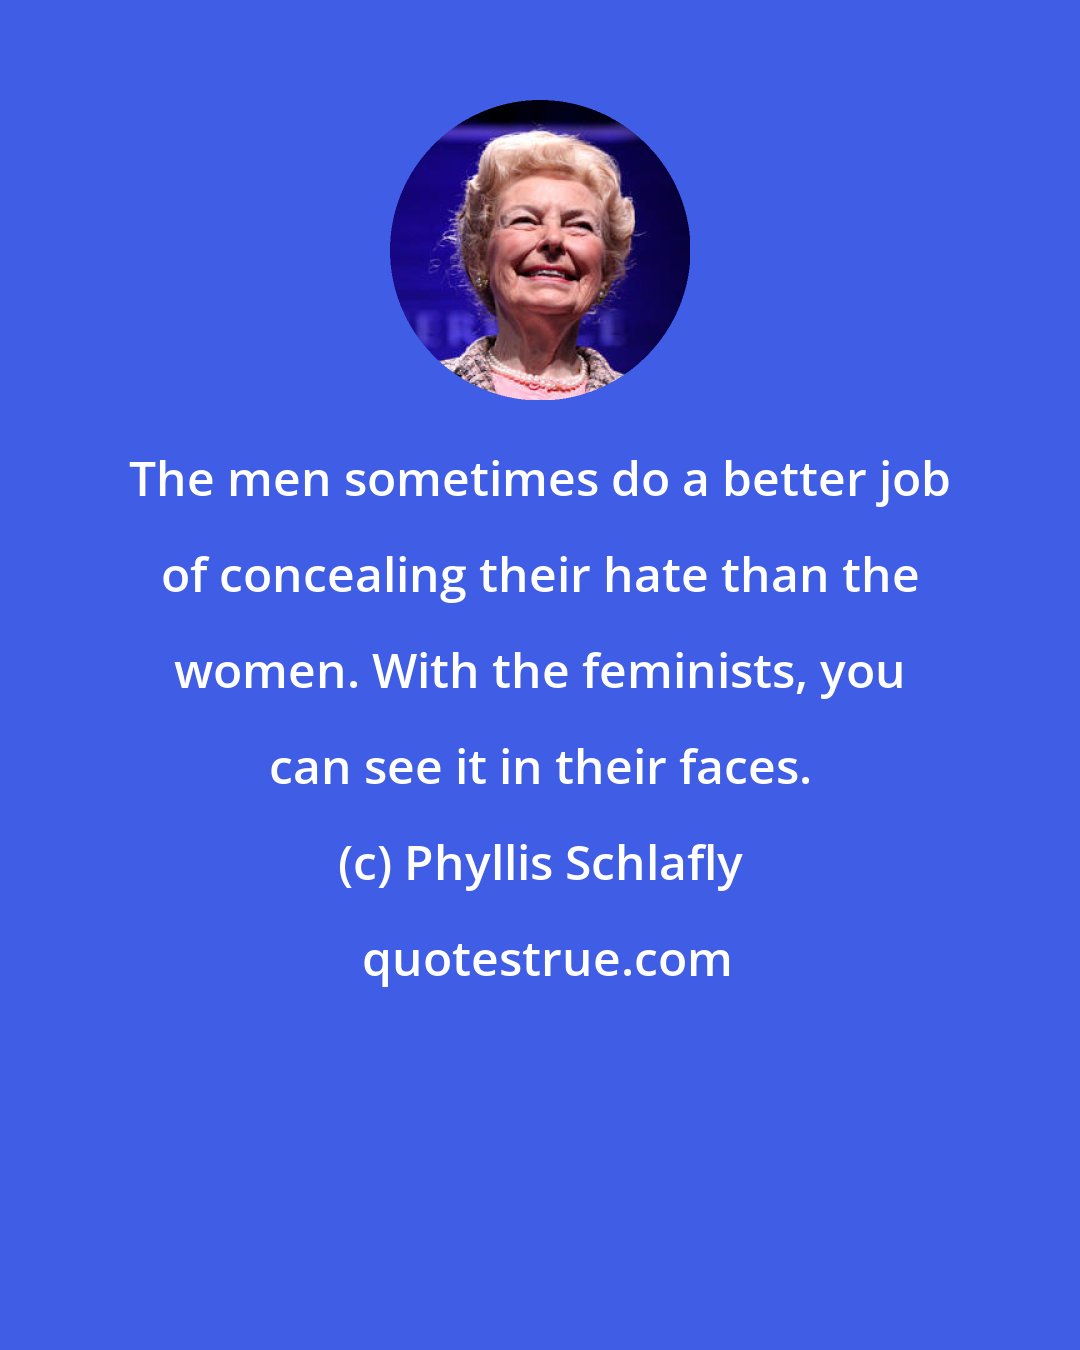 Phyllis Schlafly: The men sometimes do a better job of concealing their hate than the women. With the feminists, you can see it in their faces.